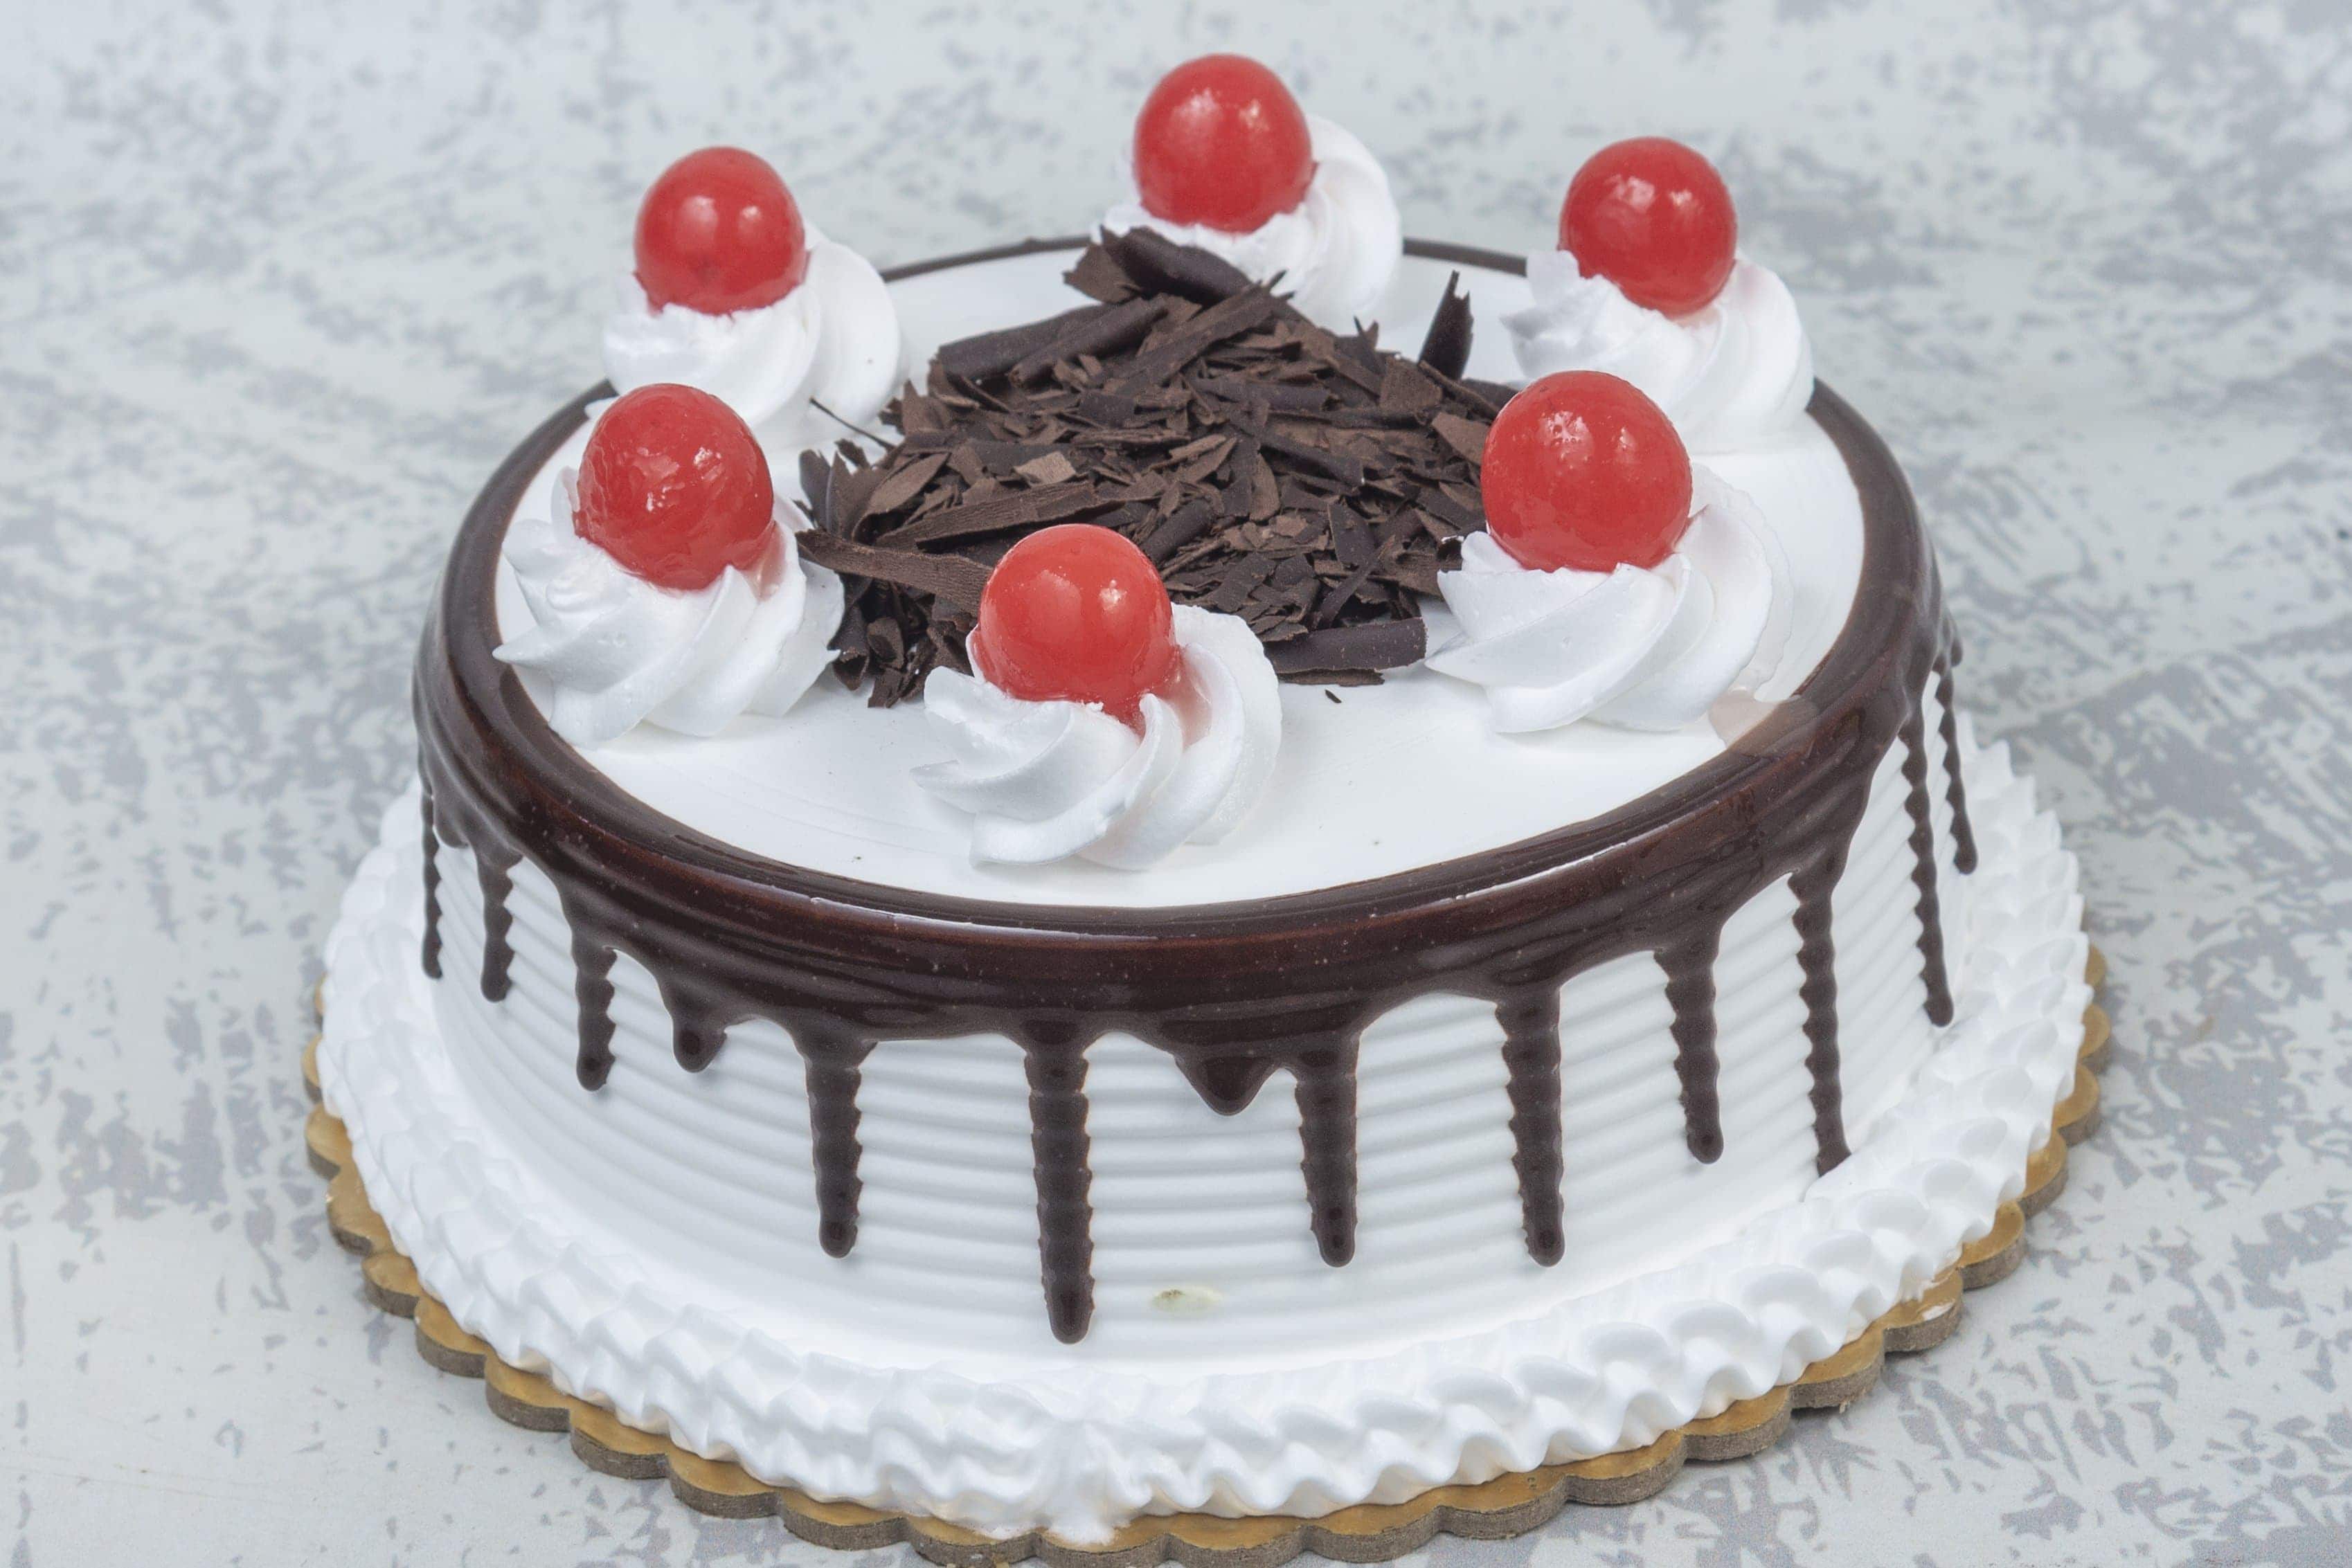 Just Bake offers the best Birthday Cakes | Order Birthday Cakes Online